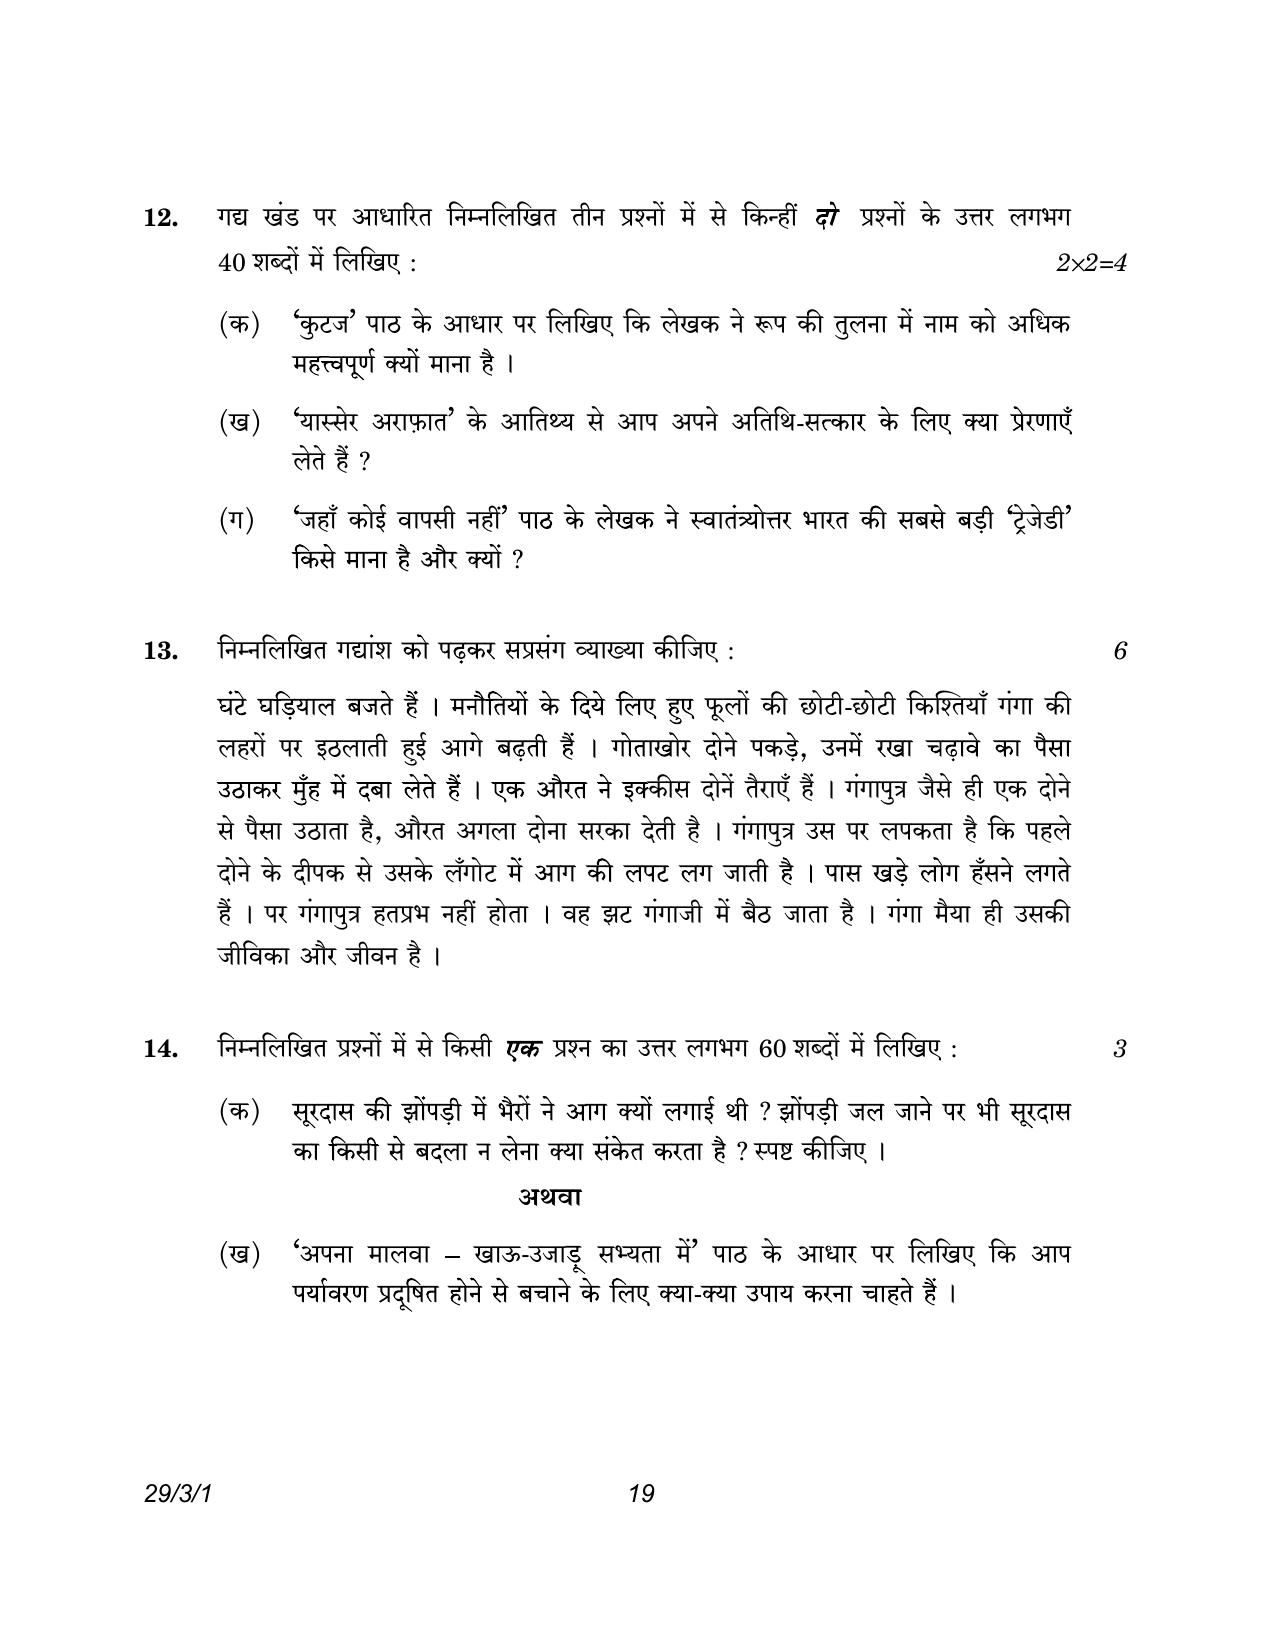 CBSE Class 12 29-3-1 Hindi Elective 2023 Question Paper - Page 19